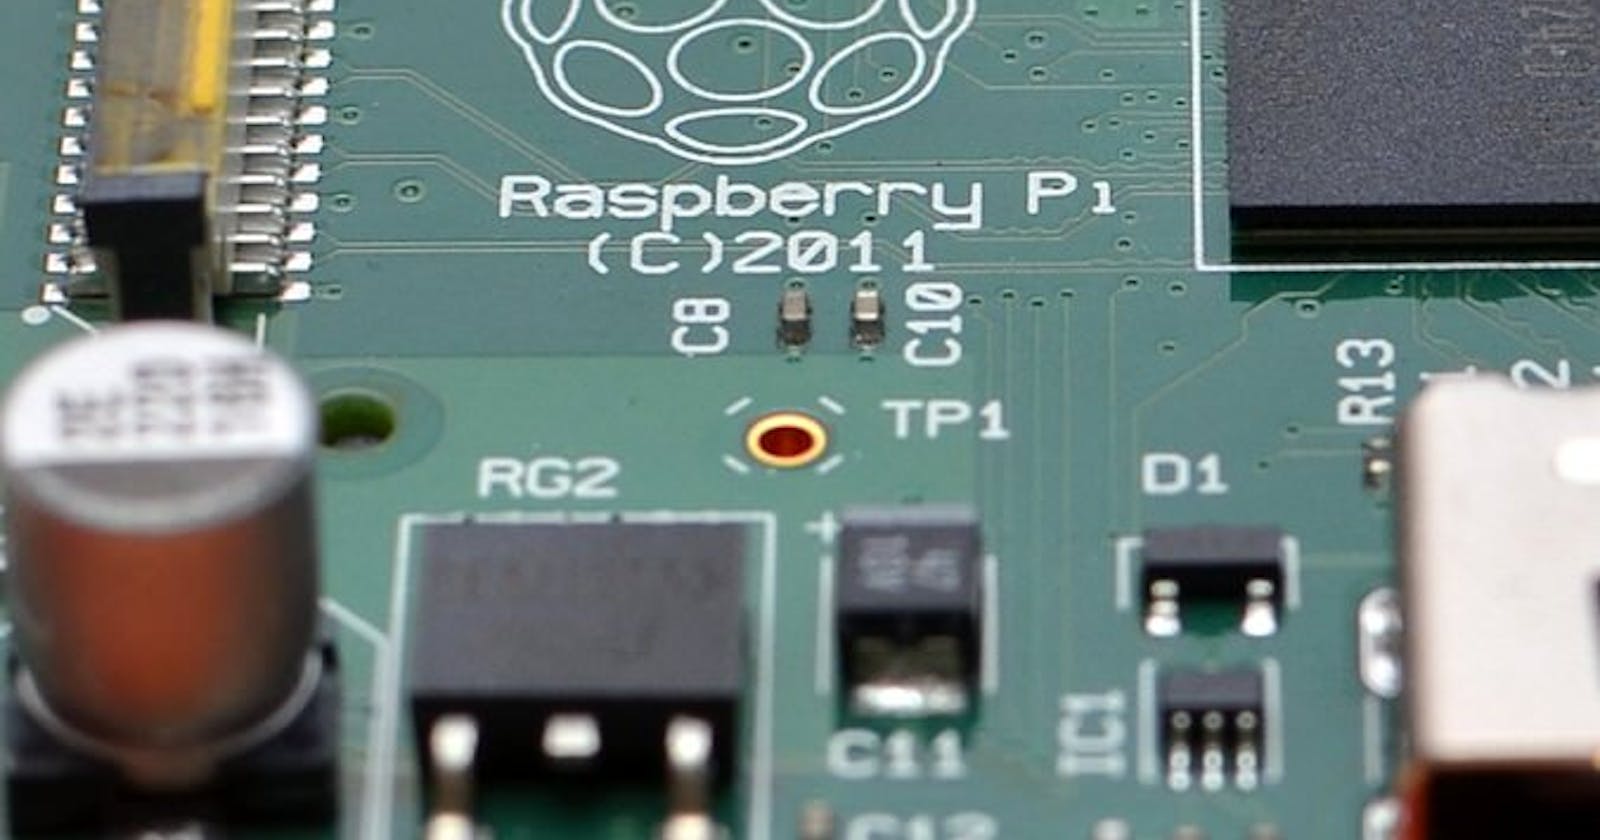 Extend the life of your SD card on a Raspberry Pi